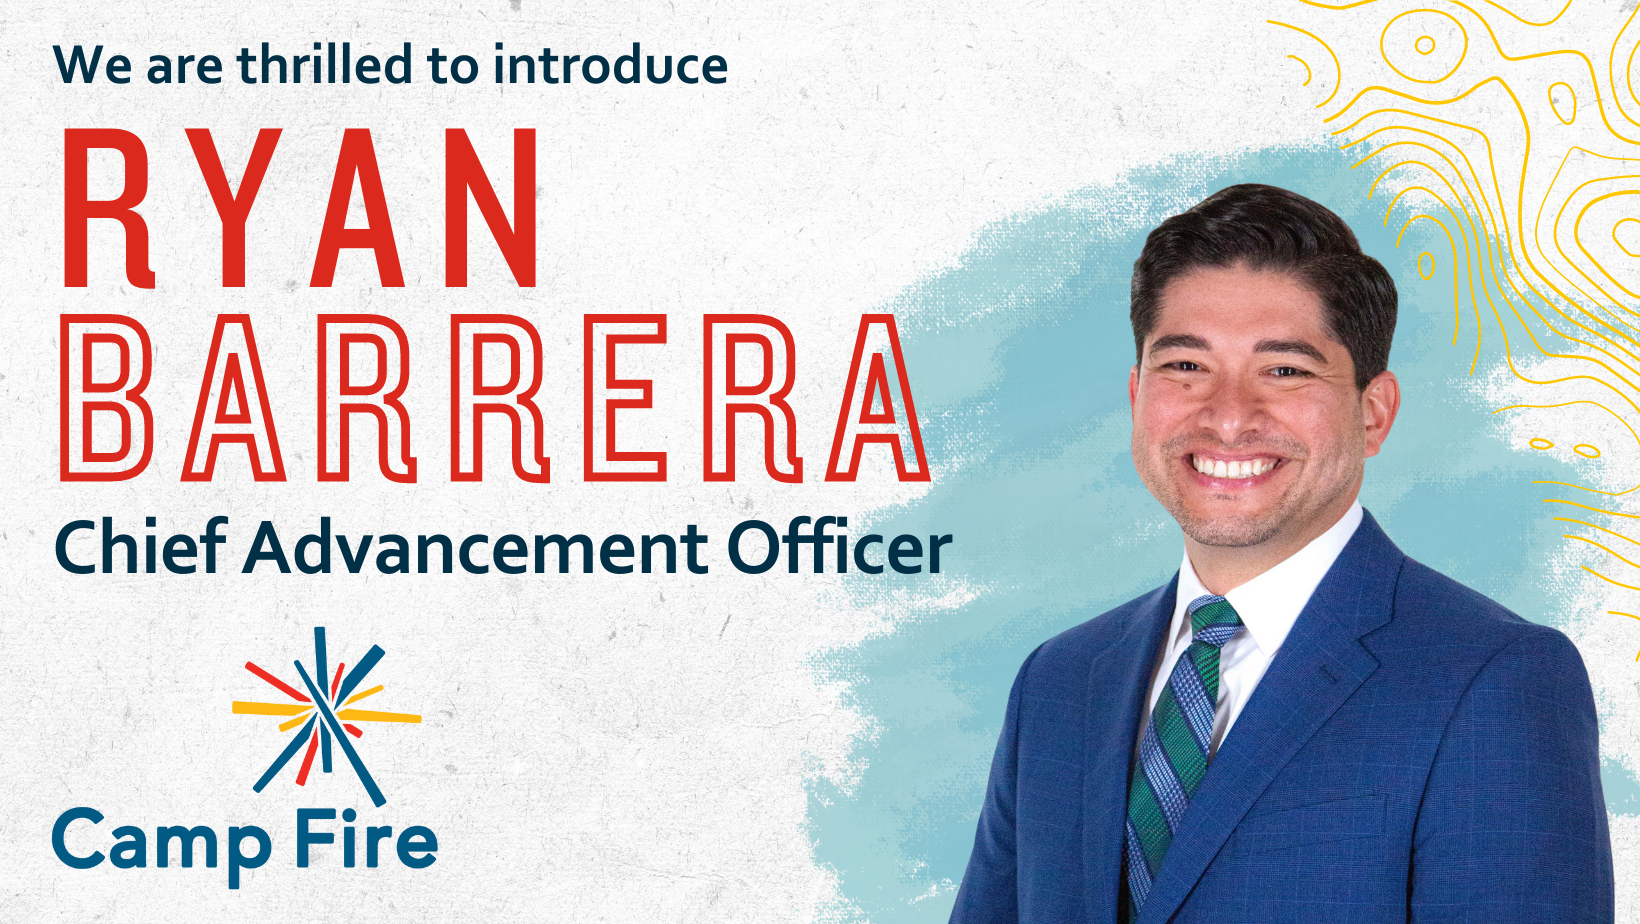 Text: We are thrilled to introduce Ryan Barrera, Chief Advancement Officer, headshot of Ryan Barrera and Camp Fire logo